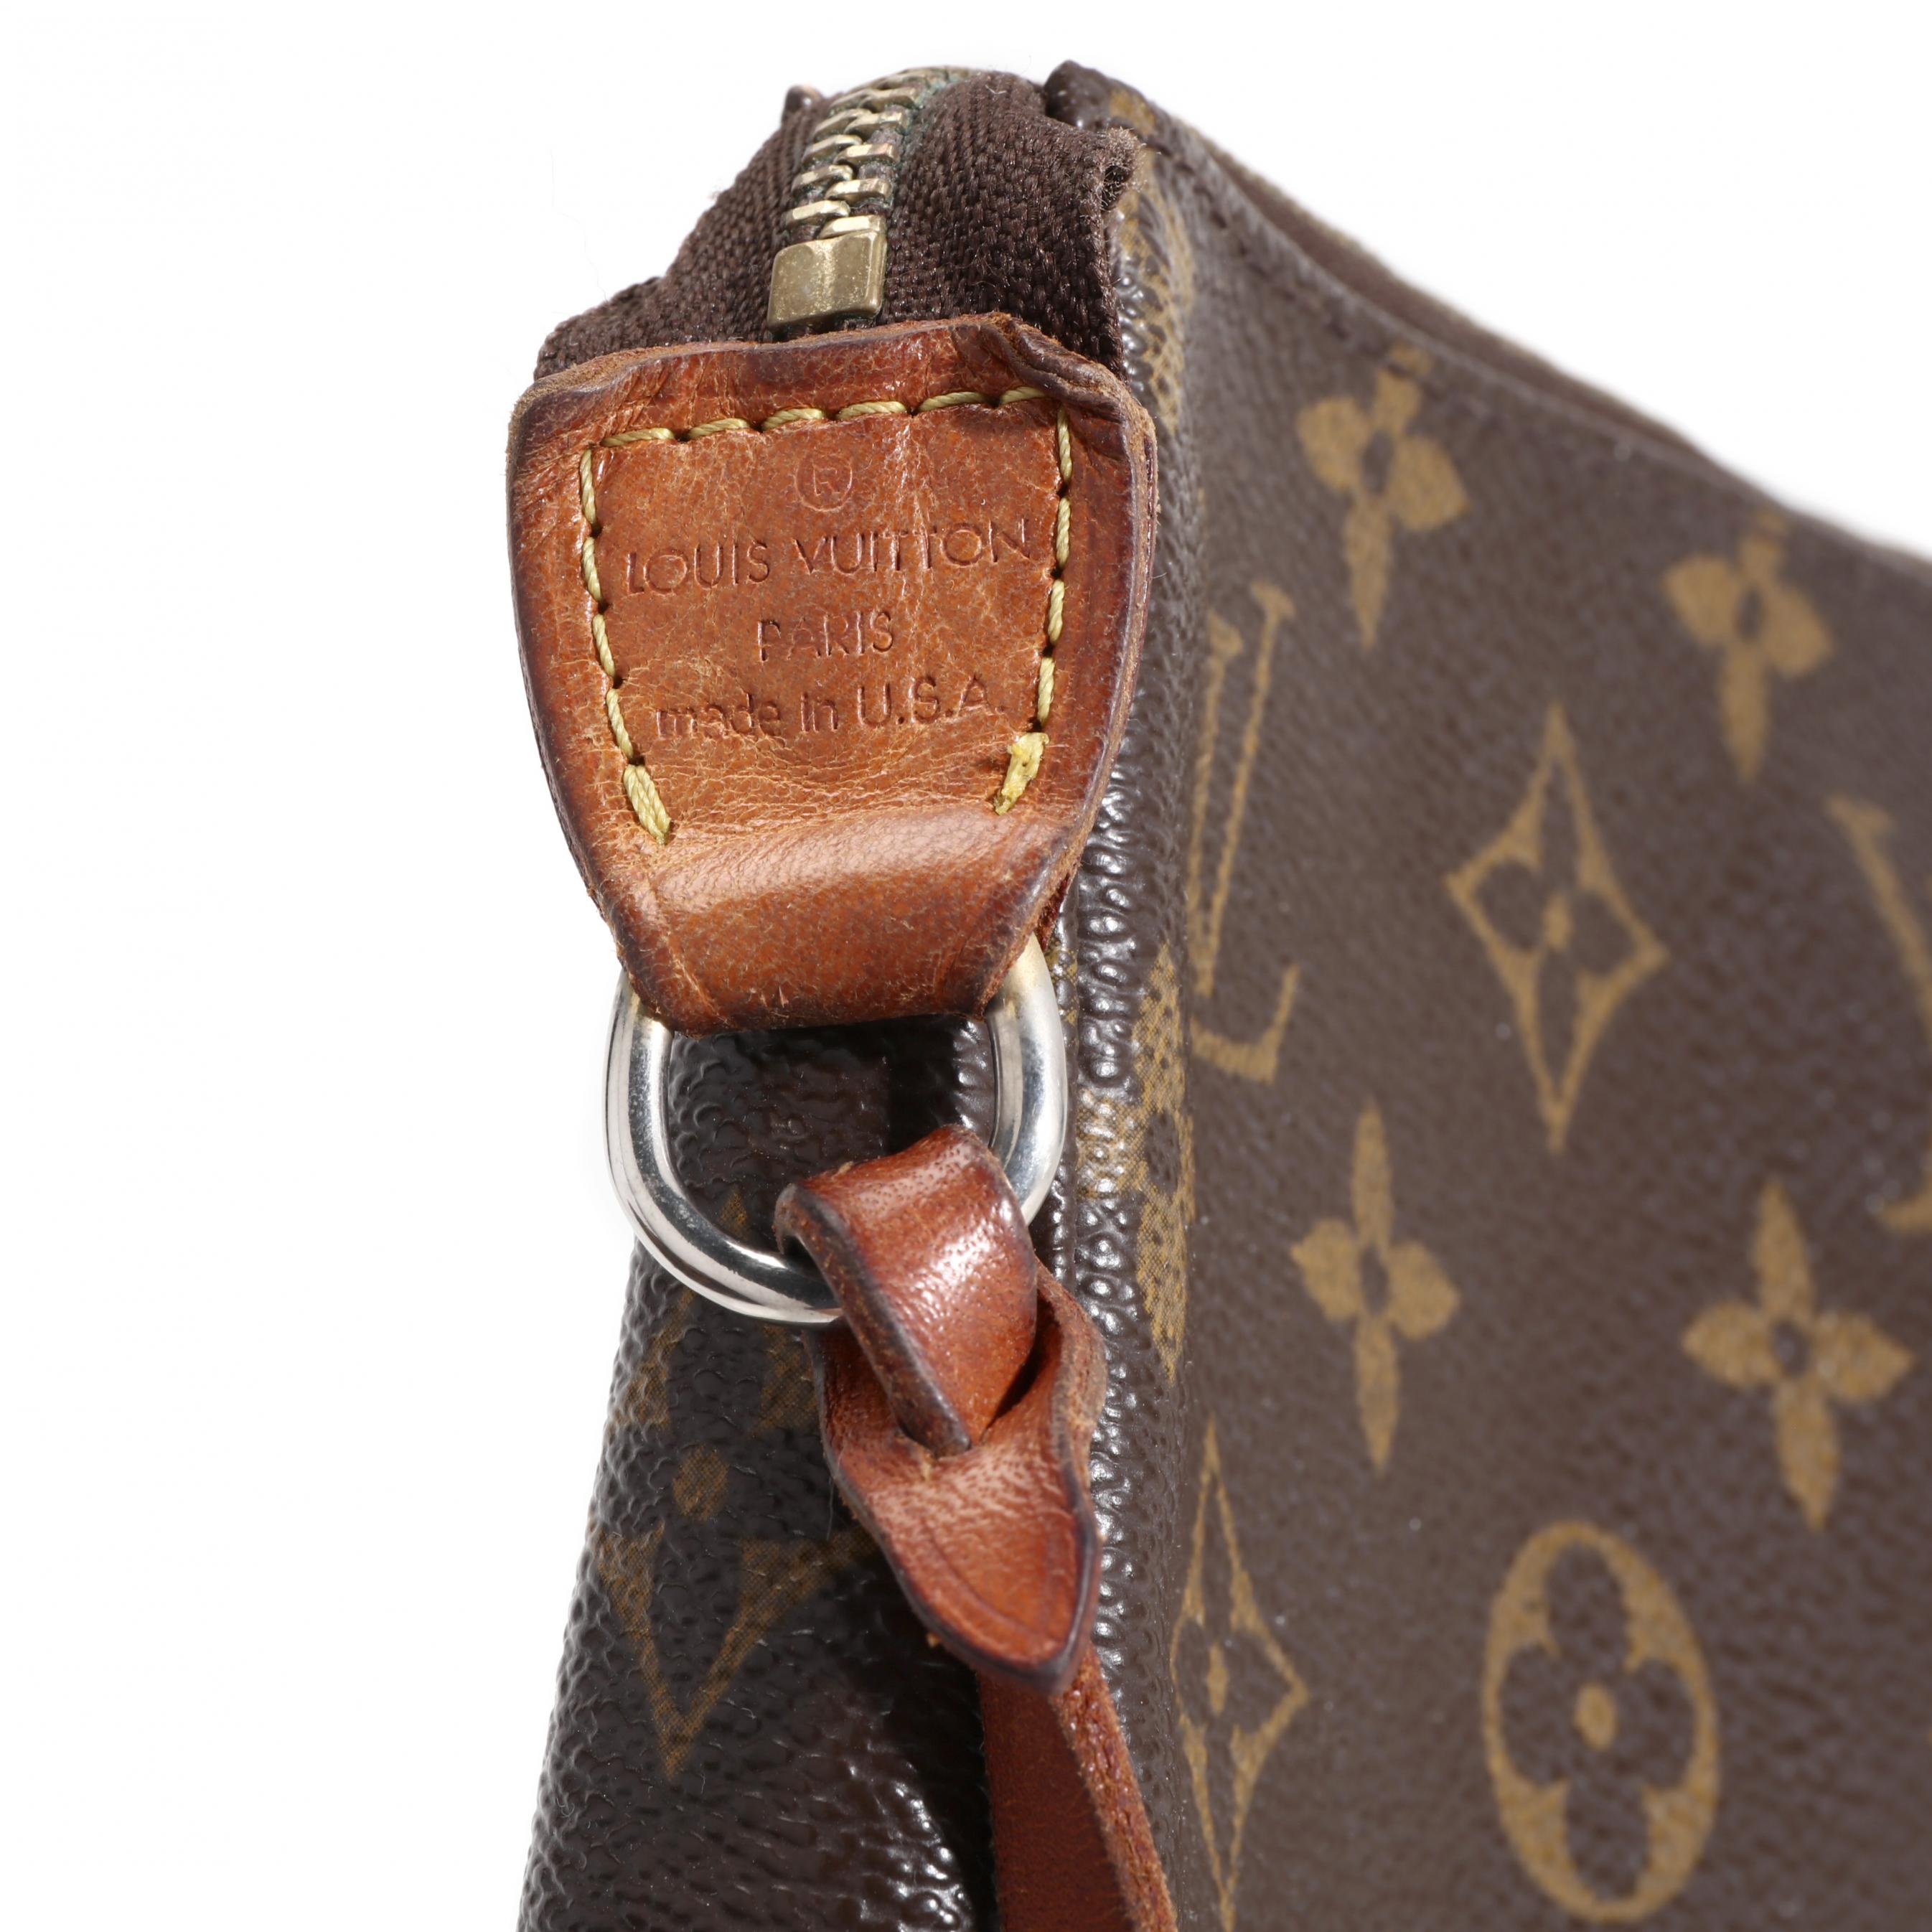 SOLD Travel in style and at a steal… Louis Vuitton Monogram Canvas